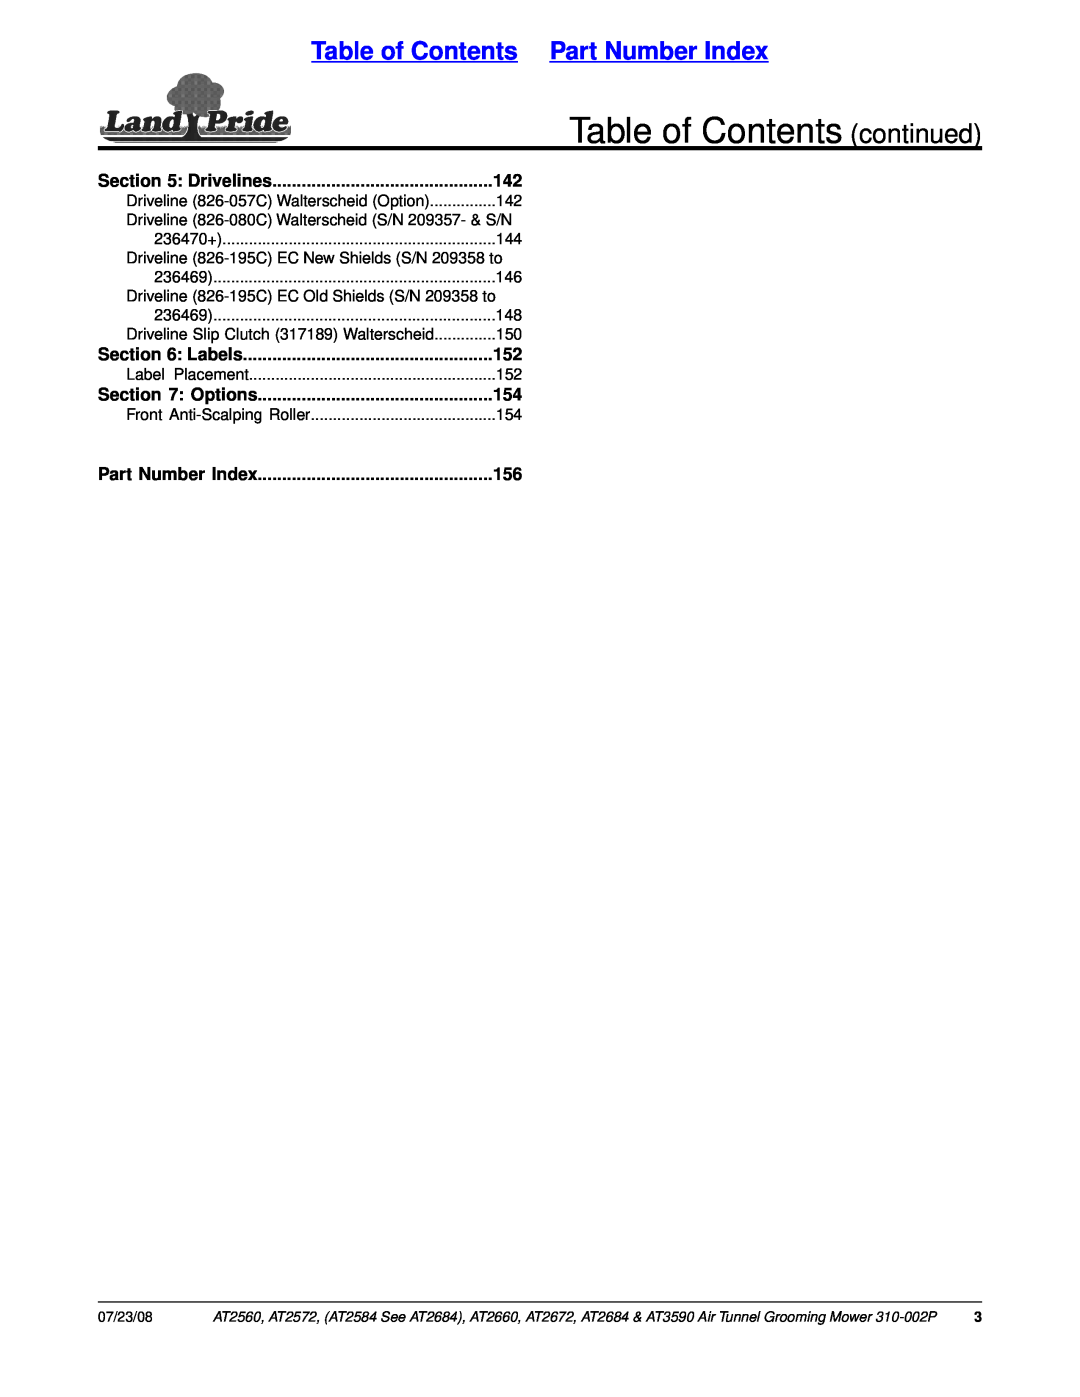 Land Pride AT2584, AT2684 Table of Contents continued, Table of Contents Part Number Index, Drivelines, Labels, Options 